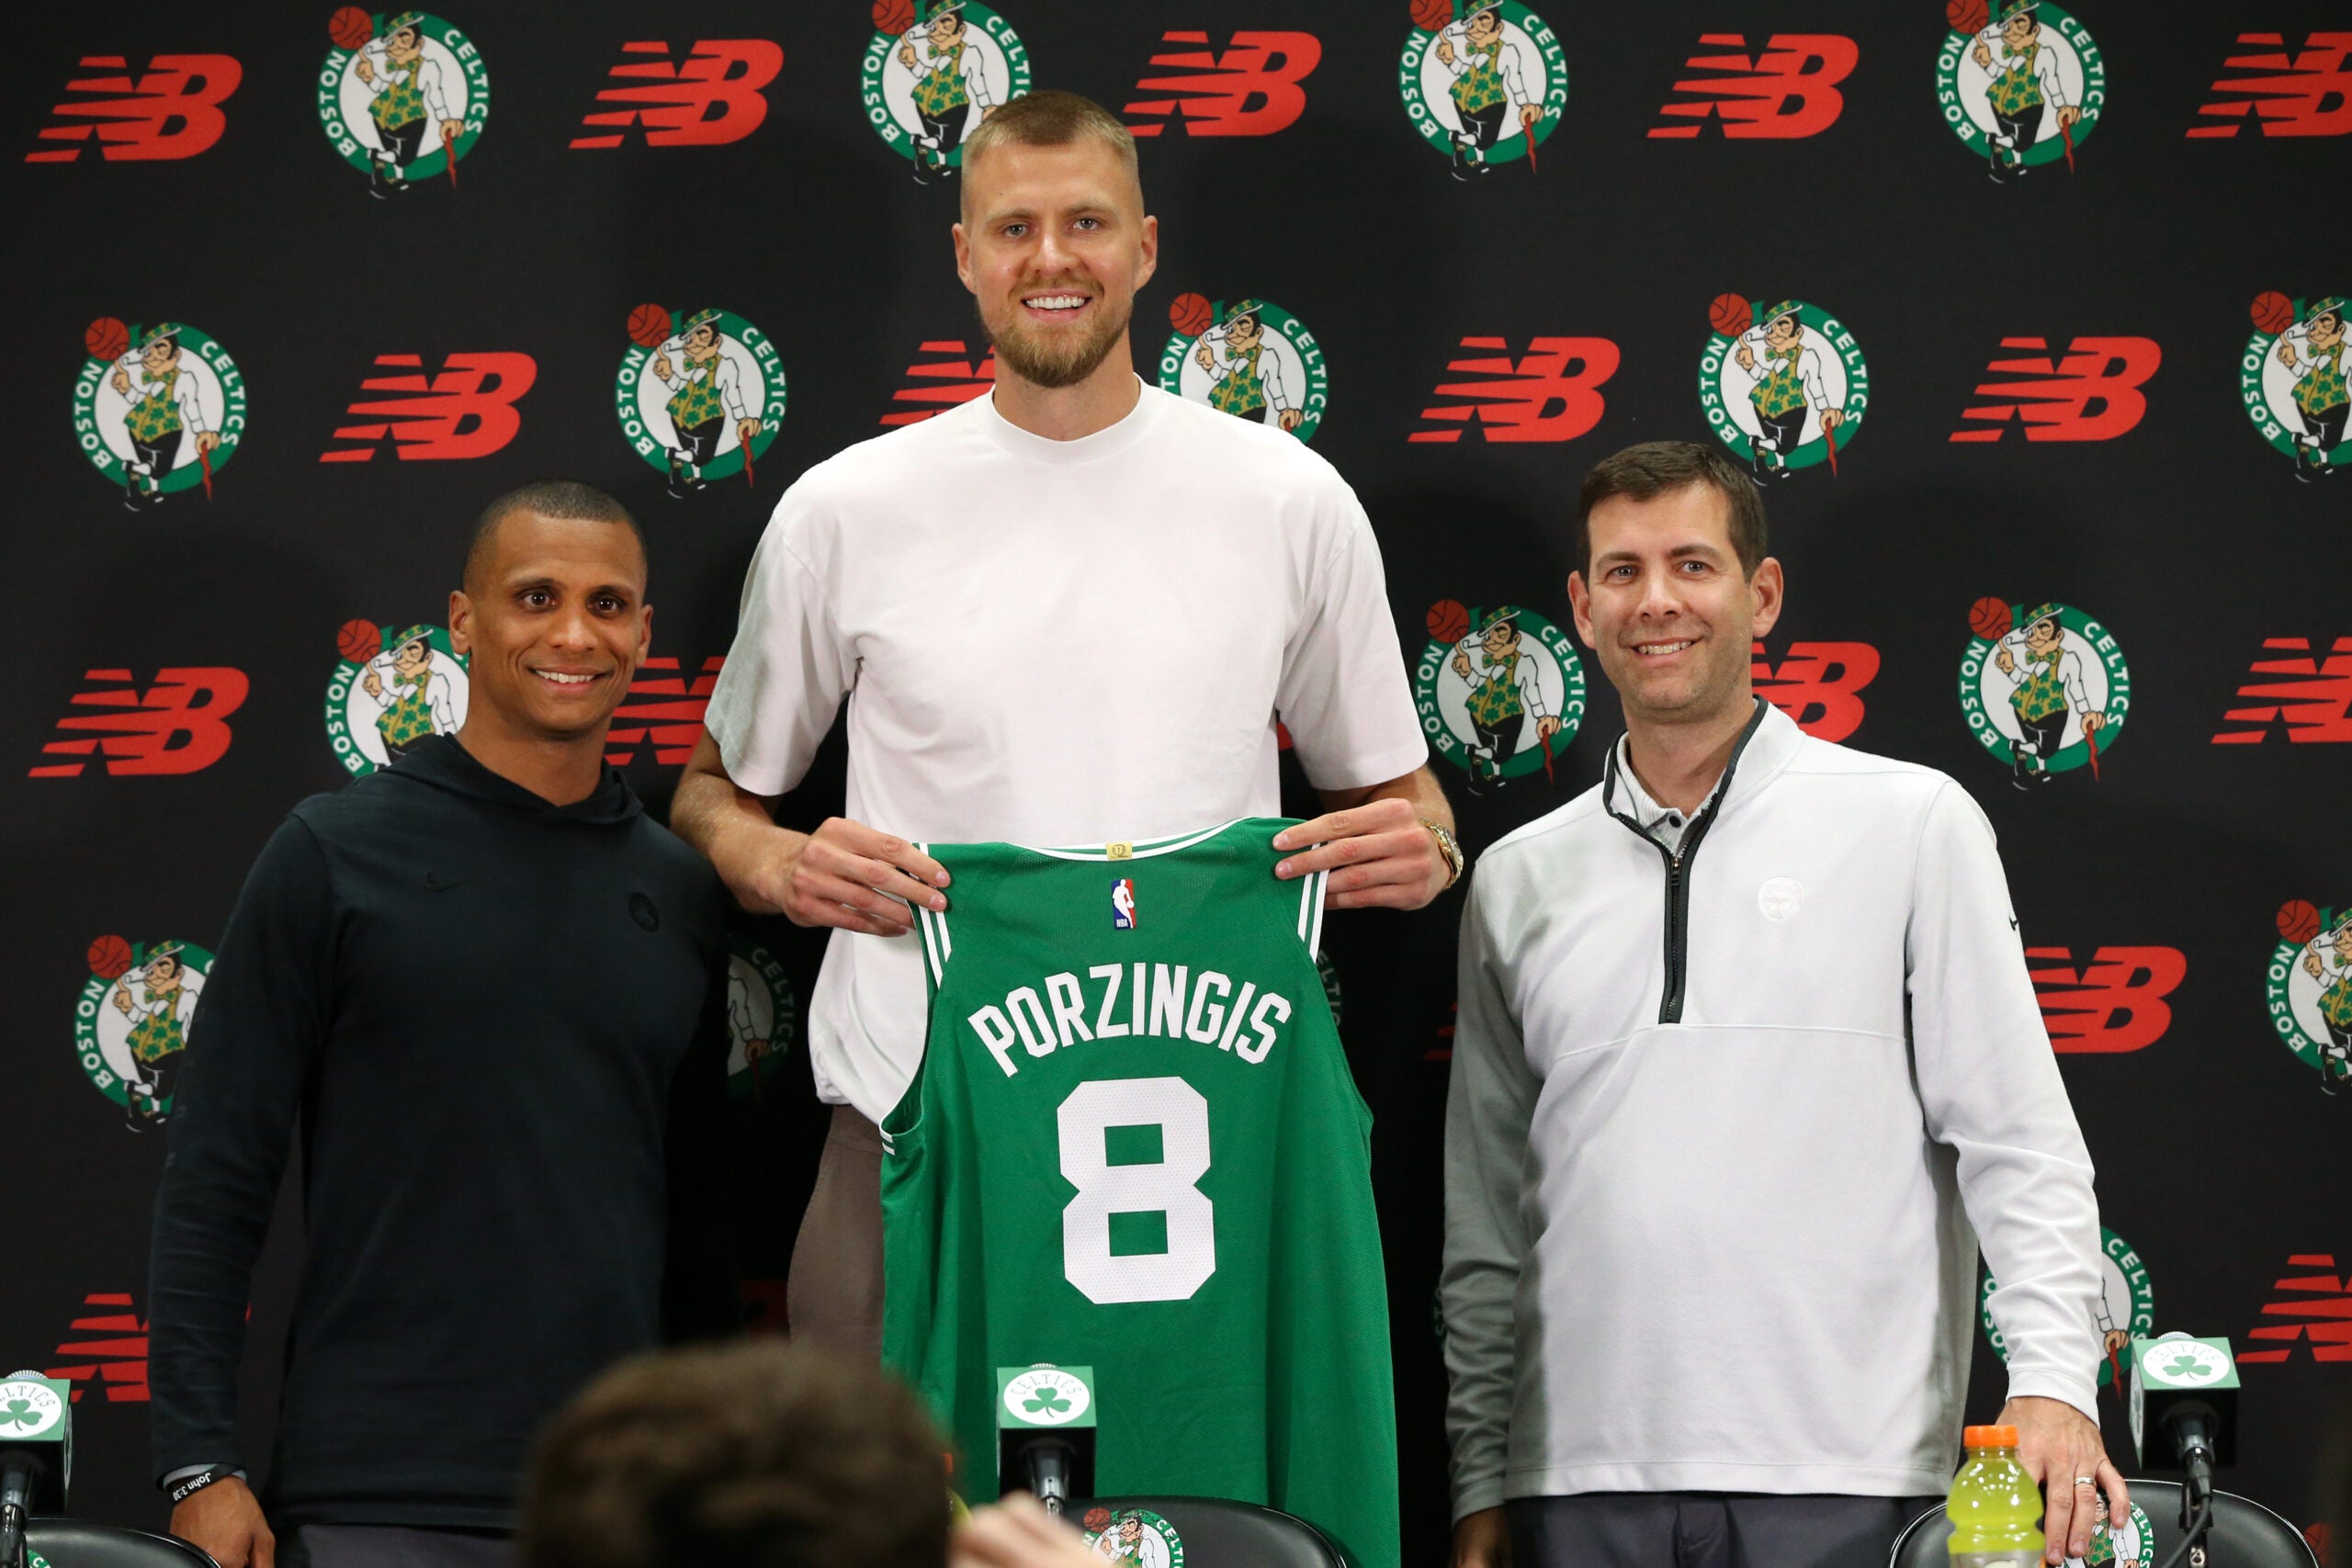 Boston Celtics head coach Joe Mazzulla (cq) left with Newly acquired big man Kristaps Porzingis(cq) middle and Brad Stevens (cq) right President of basketball operations , at a afternoon press-conference with their new player. They were all smiles during the presentation to Kristaps of his new Celtics Jersey.